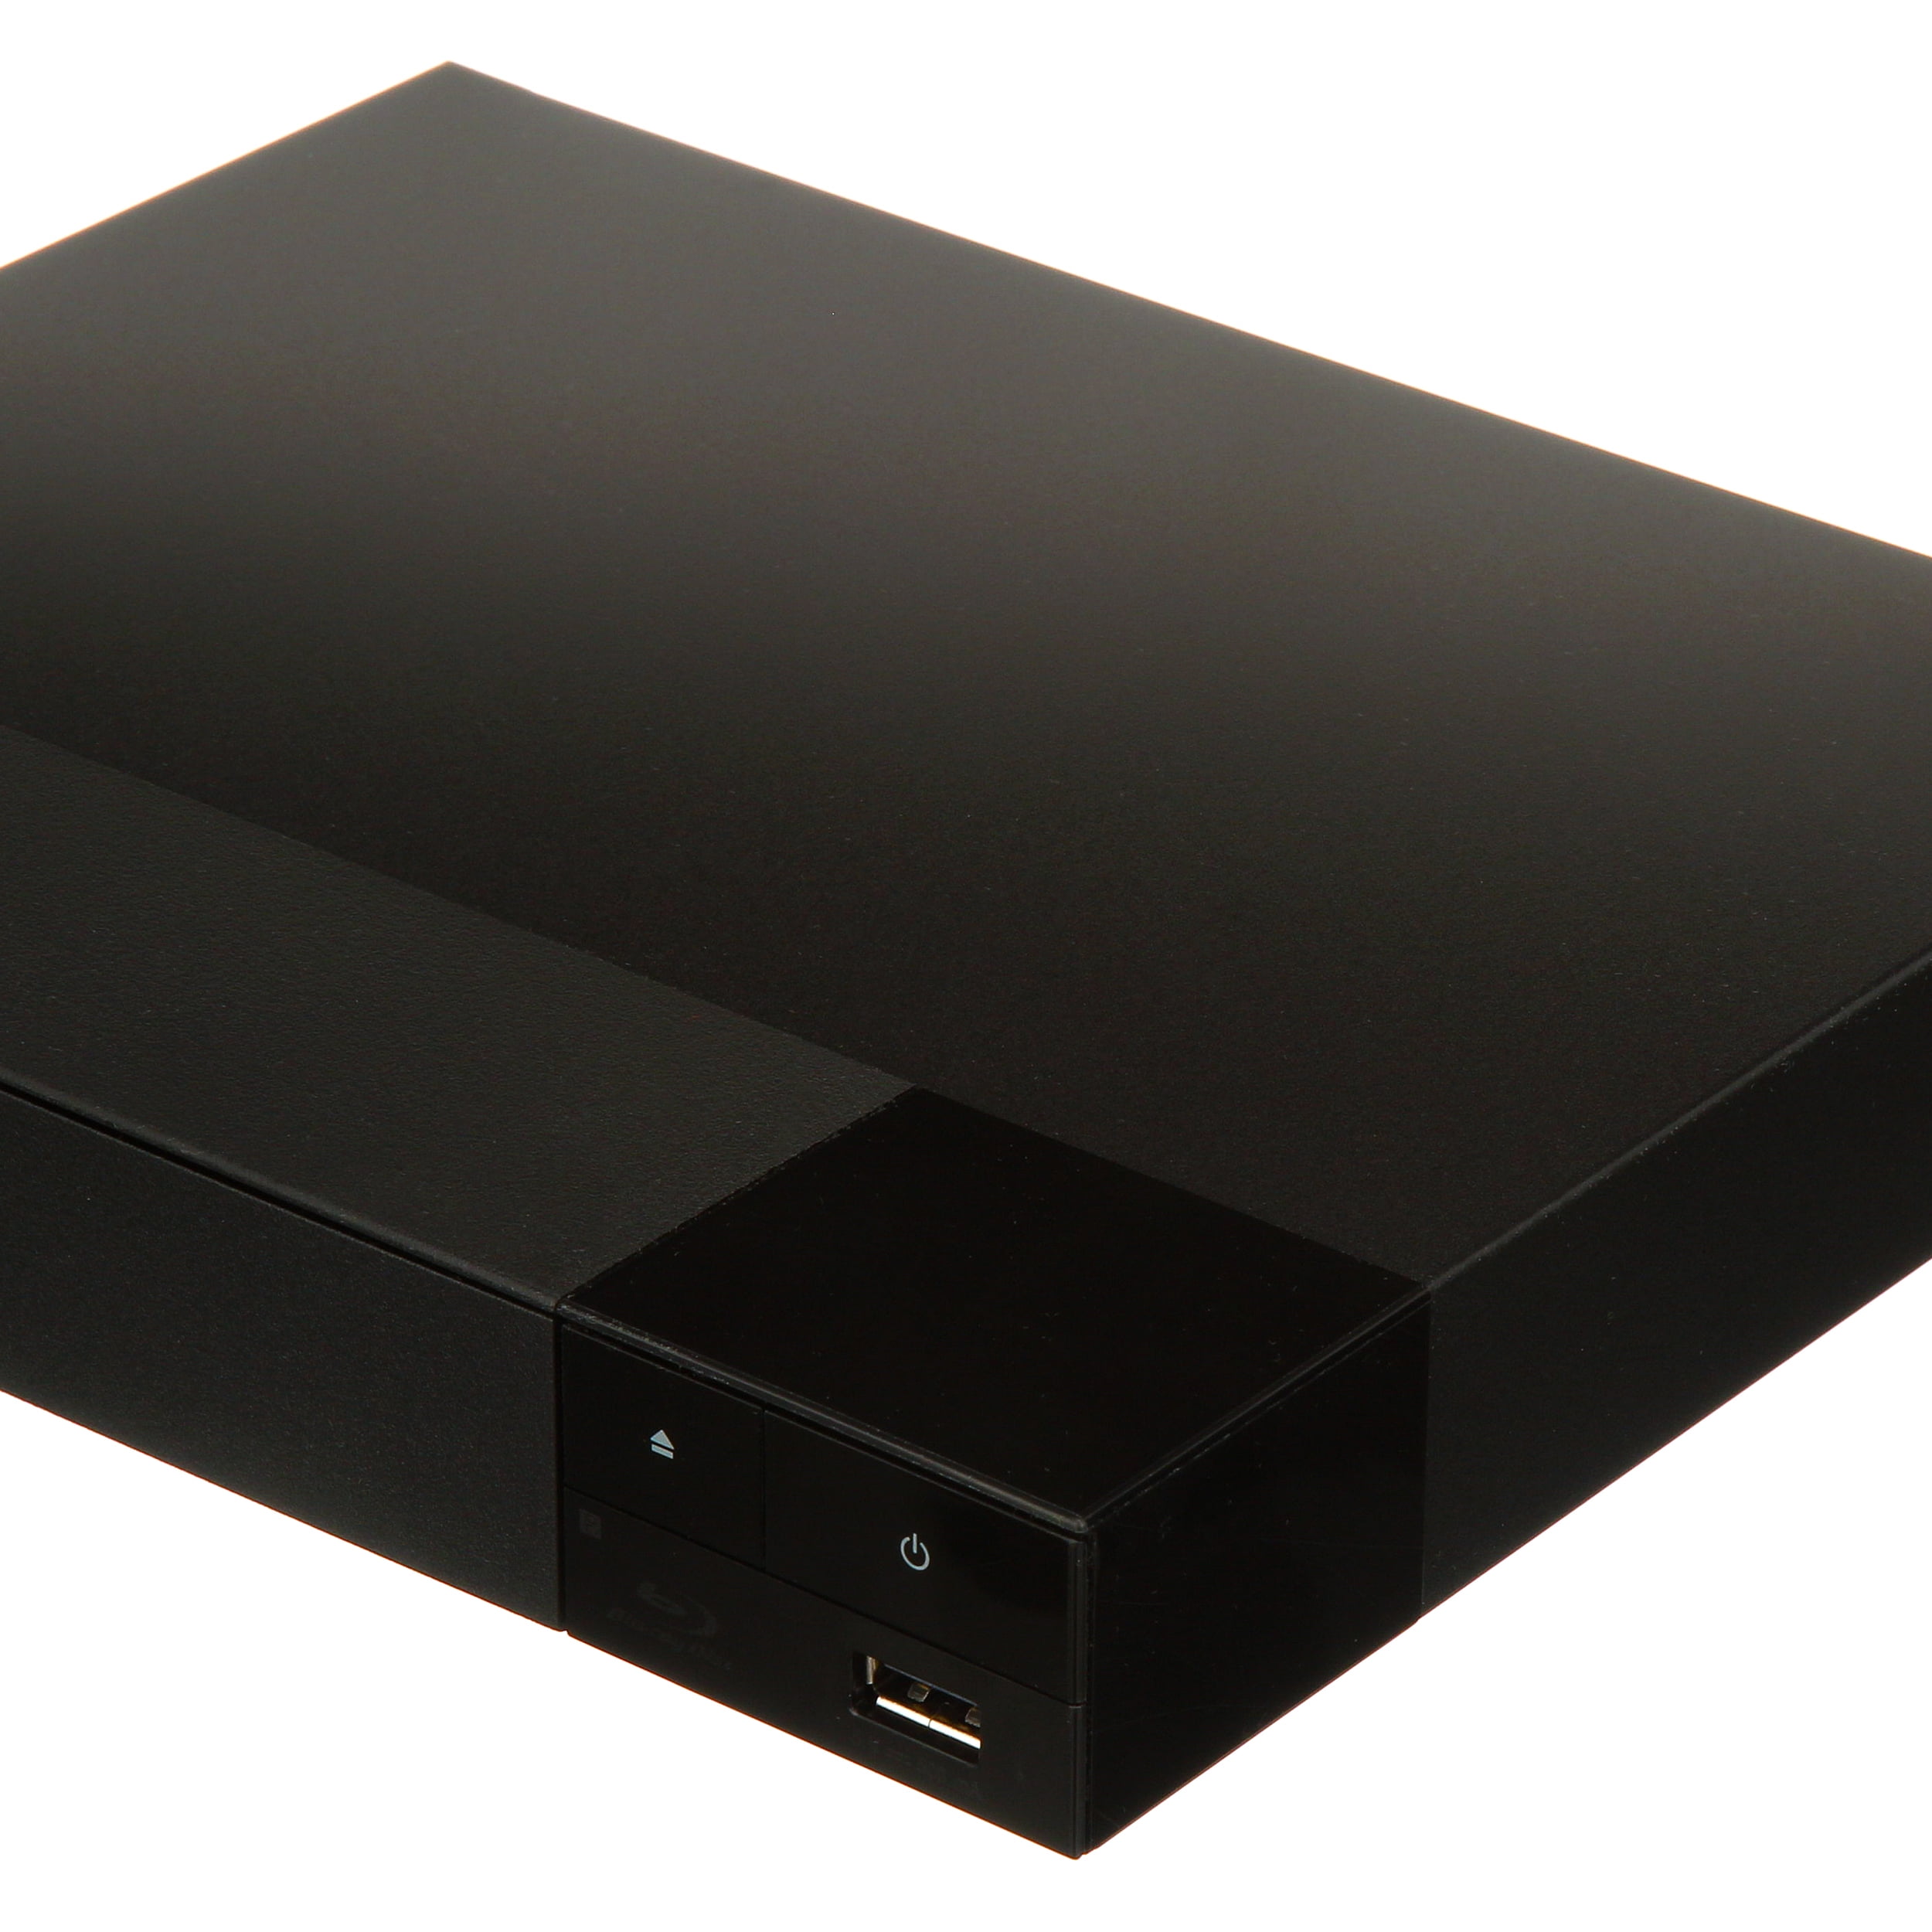 Sony BDP S Full HD Steaming Blu ray DVD Player with built in